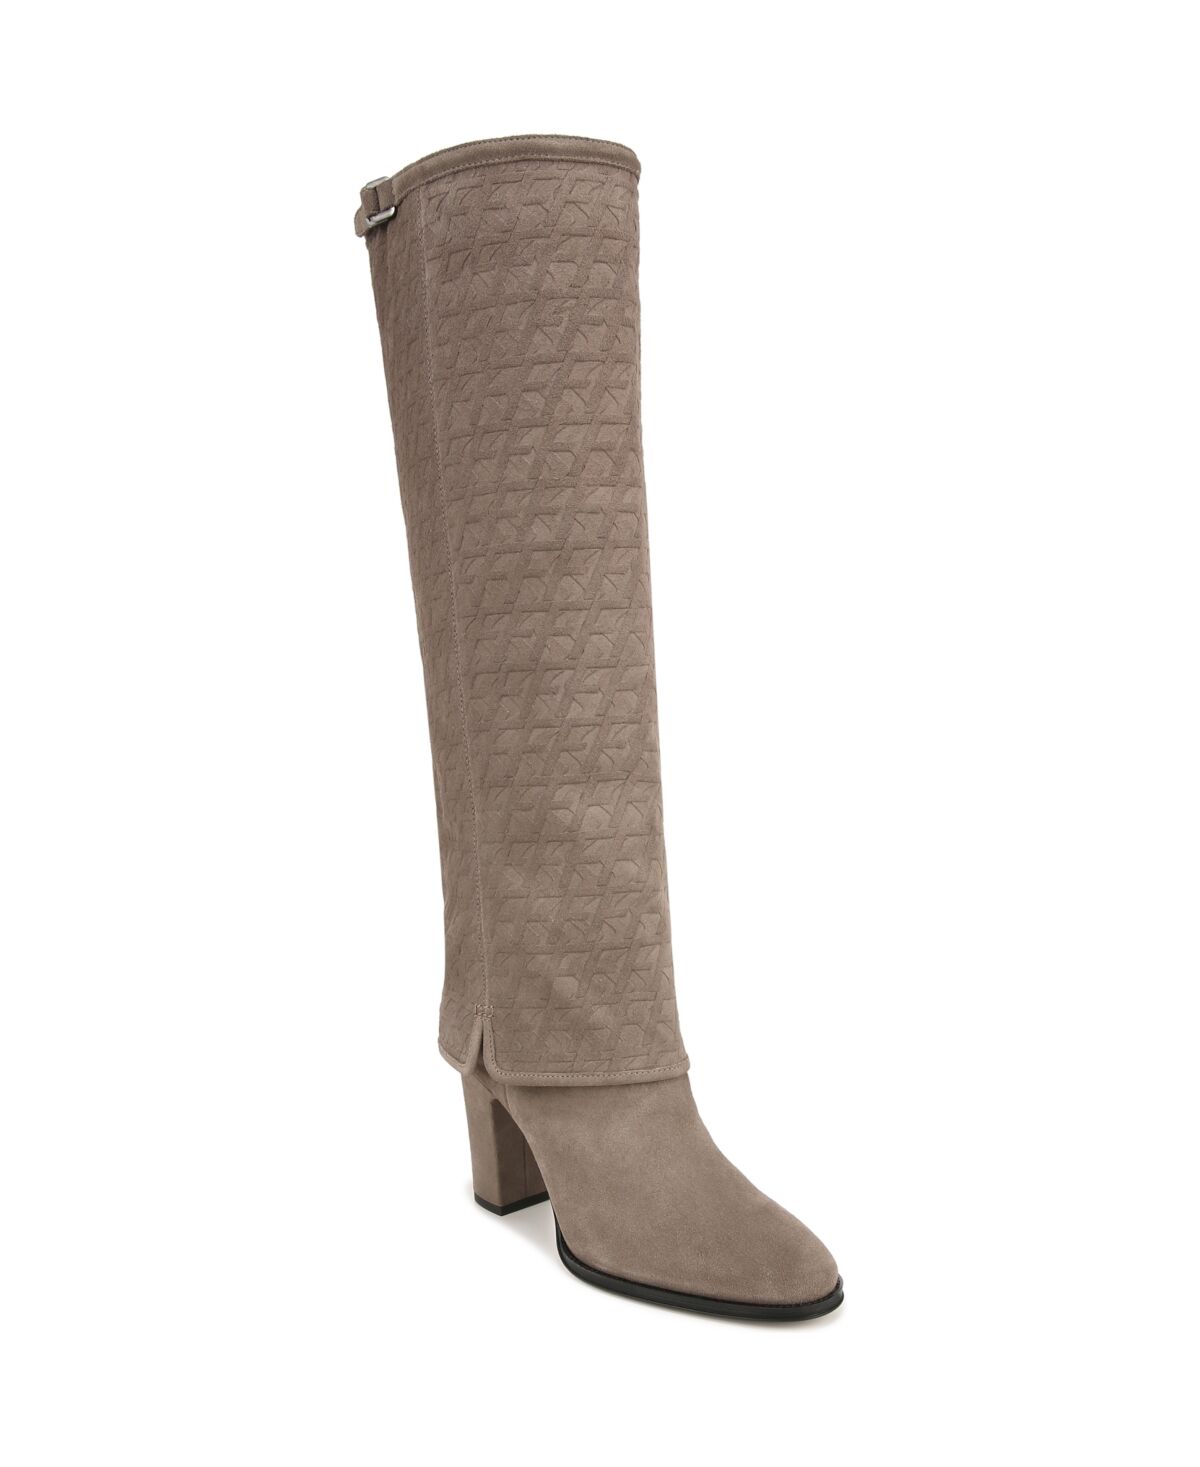 Franco Sarto Informa West Knee High Fold-Over Cuffed Boots - Grey Suede